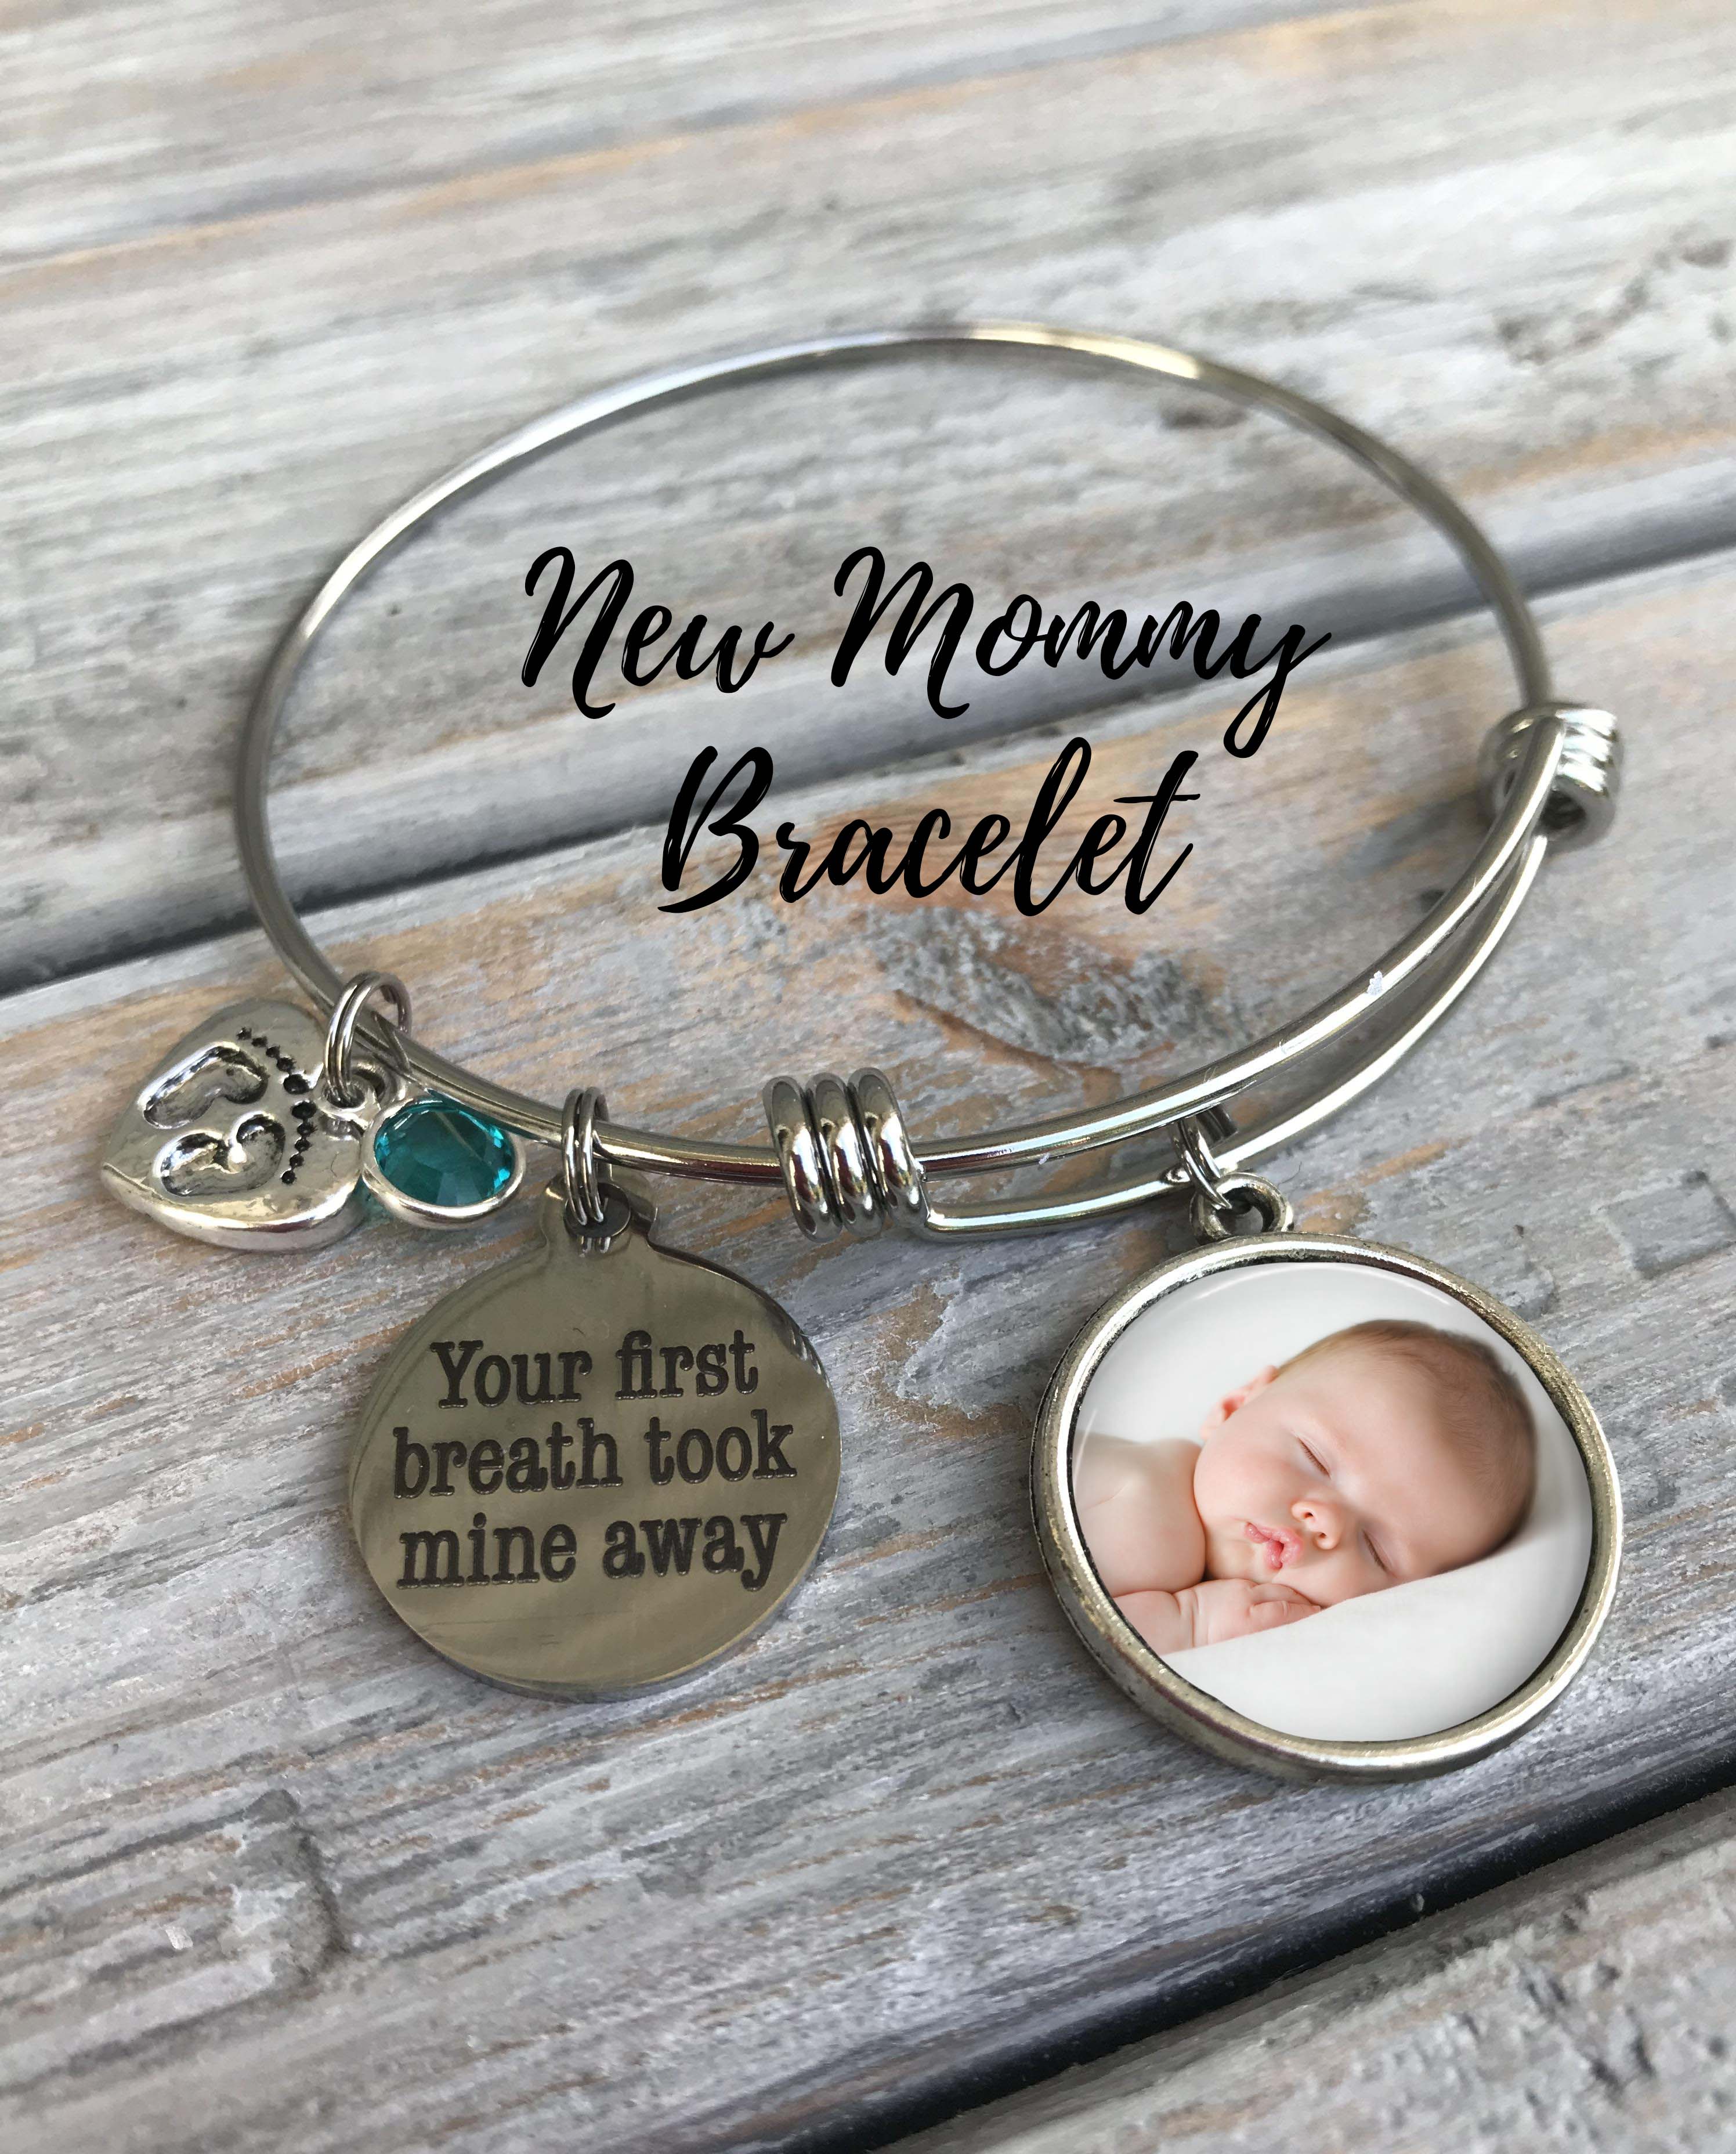 This Handwritten Bracelet From Etsy Is the Perfect Gift for Moms